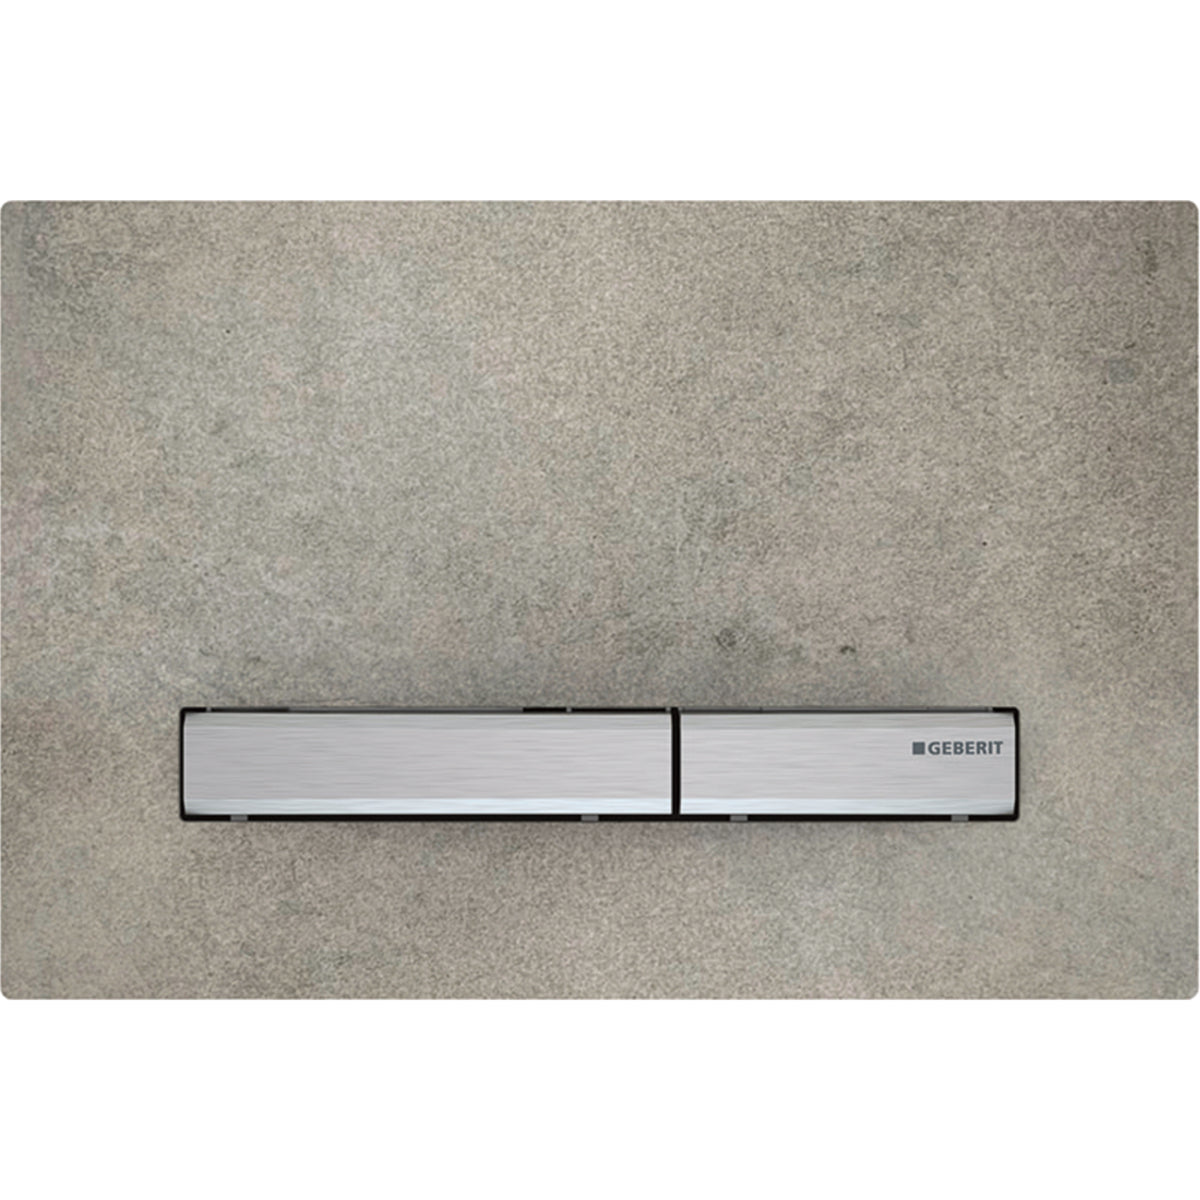 Geberit 115.788.JV.2- Geberit actuator plate Sigma50 for dual flush, metal colour chrome-plated: chrome-plated, concrete look - FaucetExpress.ca